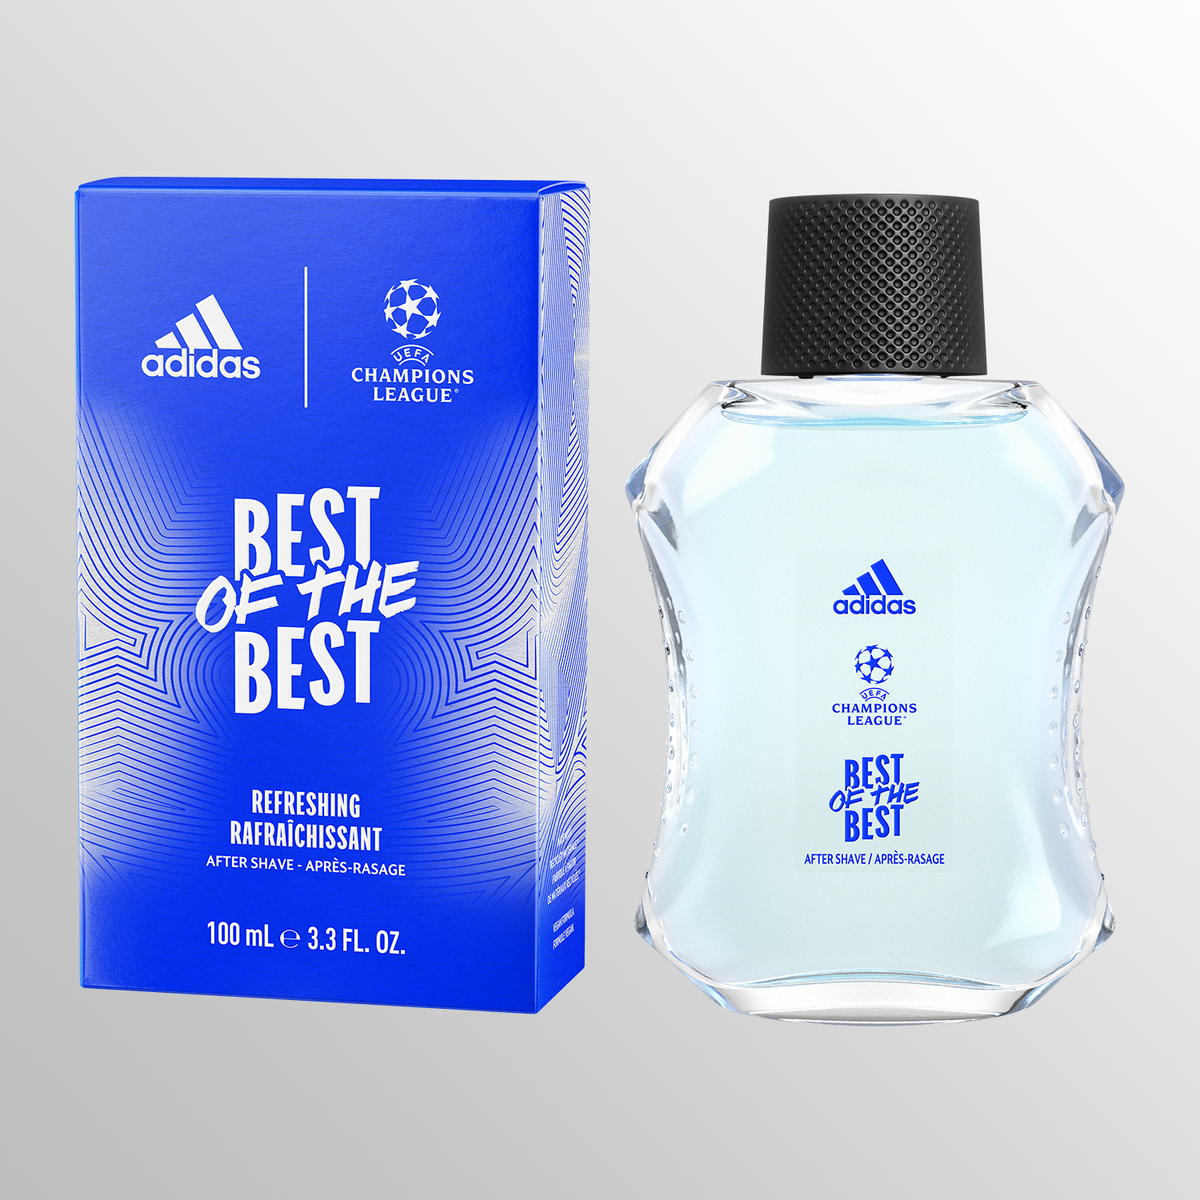 Adidas UEFA Best of the Best After Shave 100ml